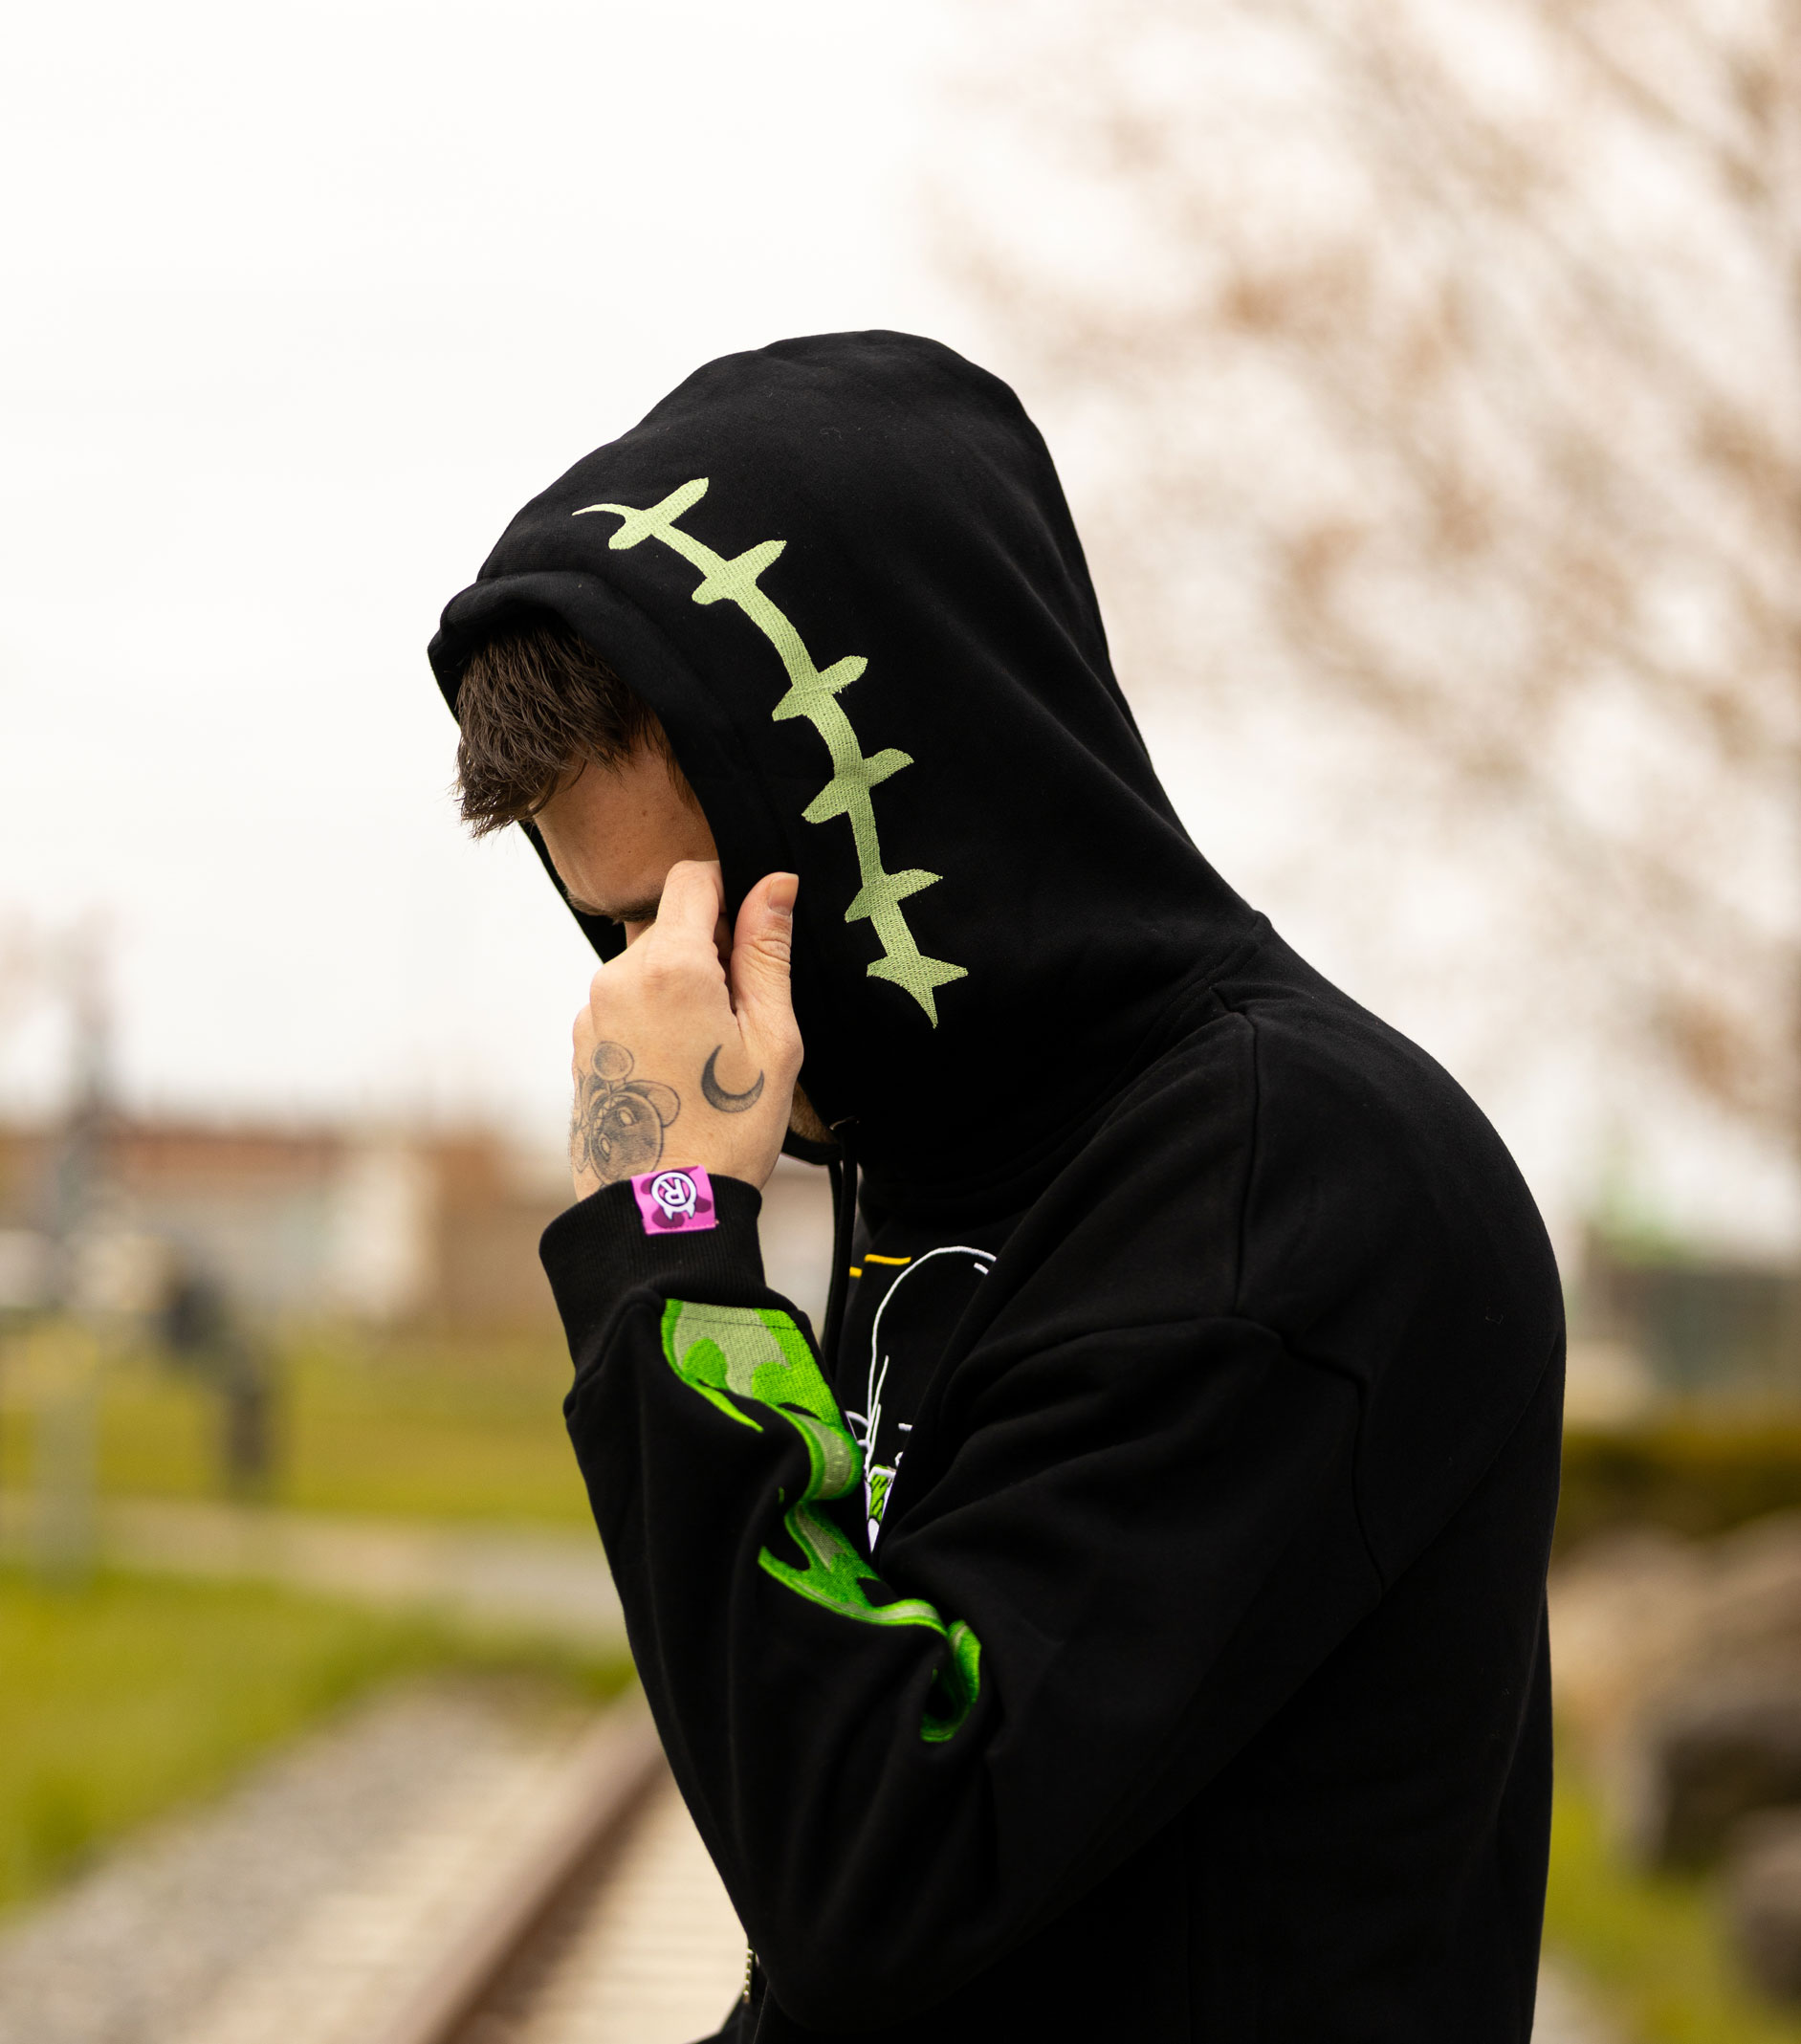 Zoro one piece embroidered hoodie. Limited edition embroidery work.